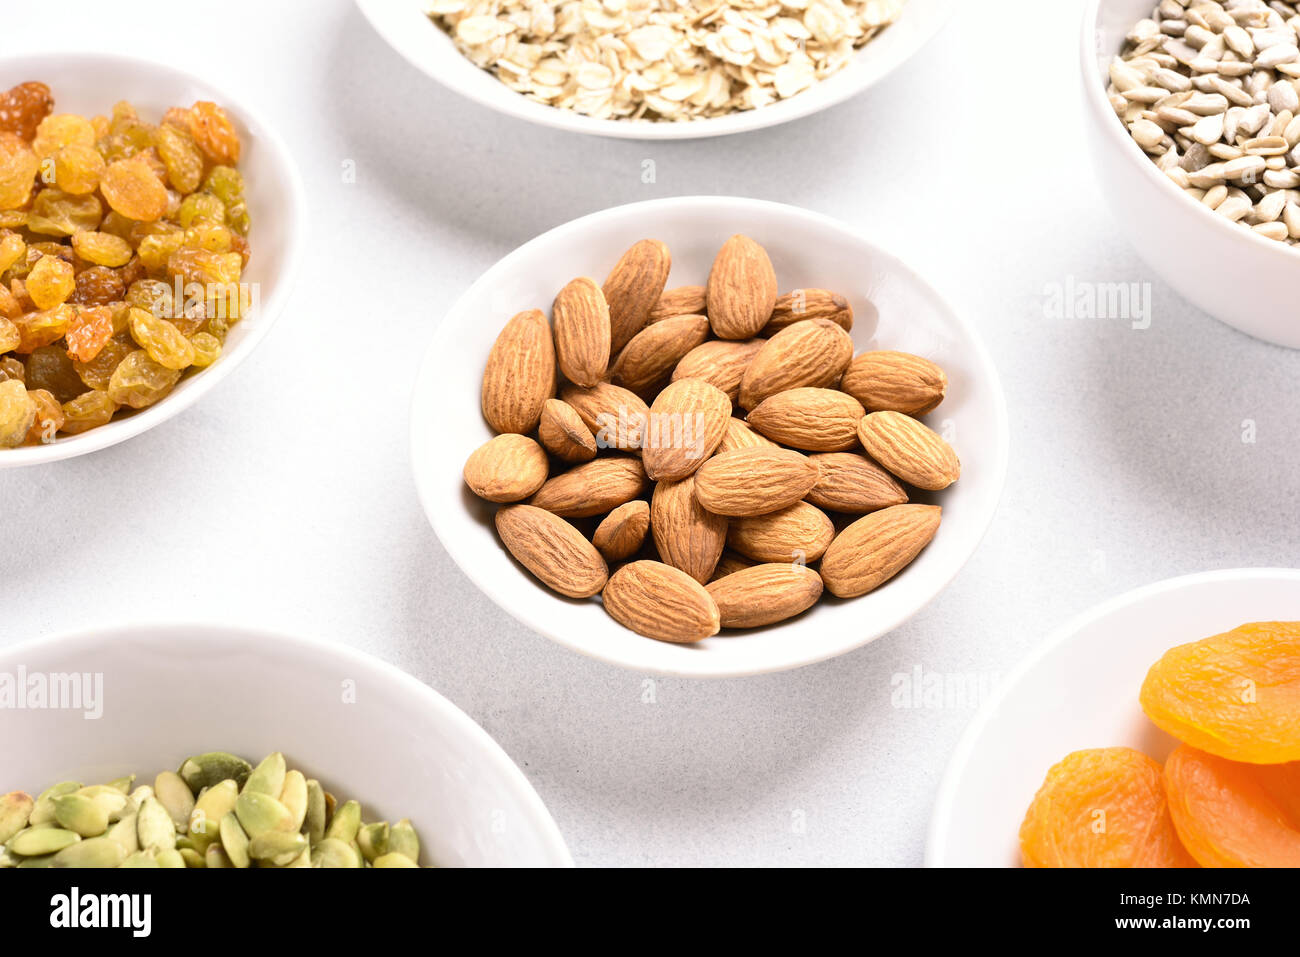 Ingredients for cooking granola on white background. Stock Photo